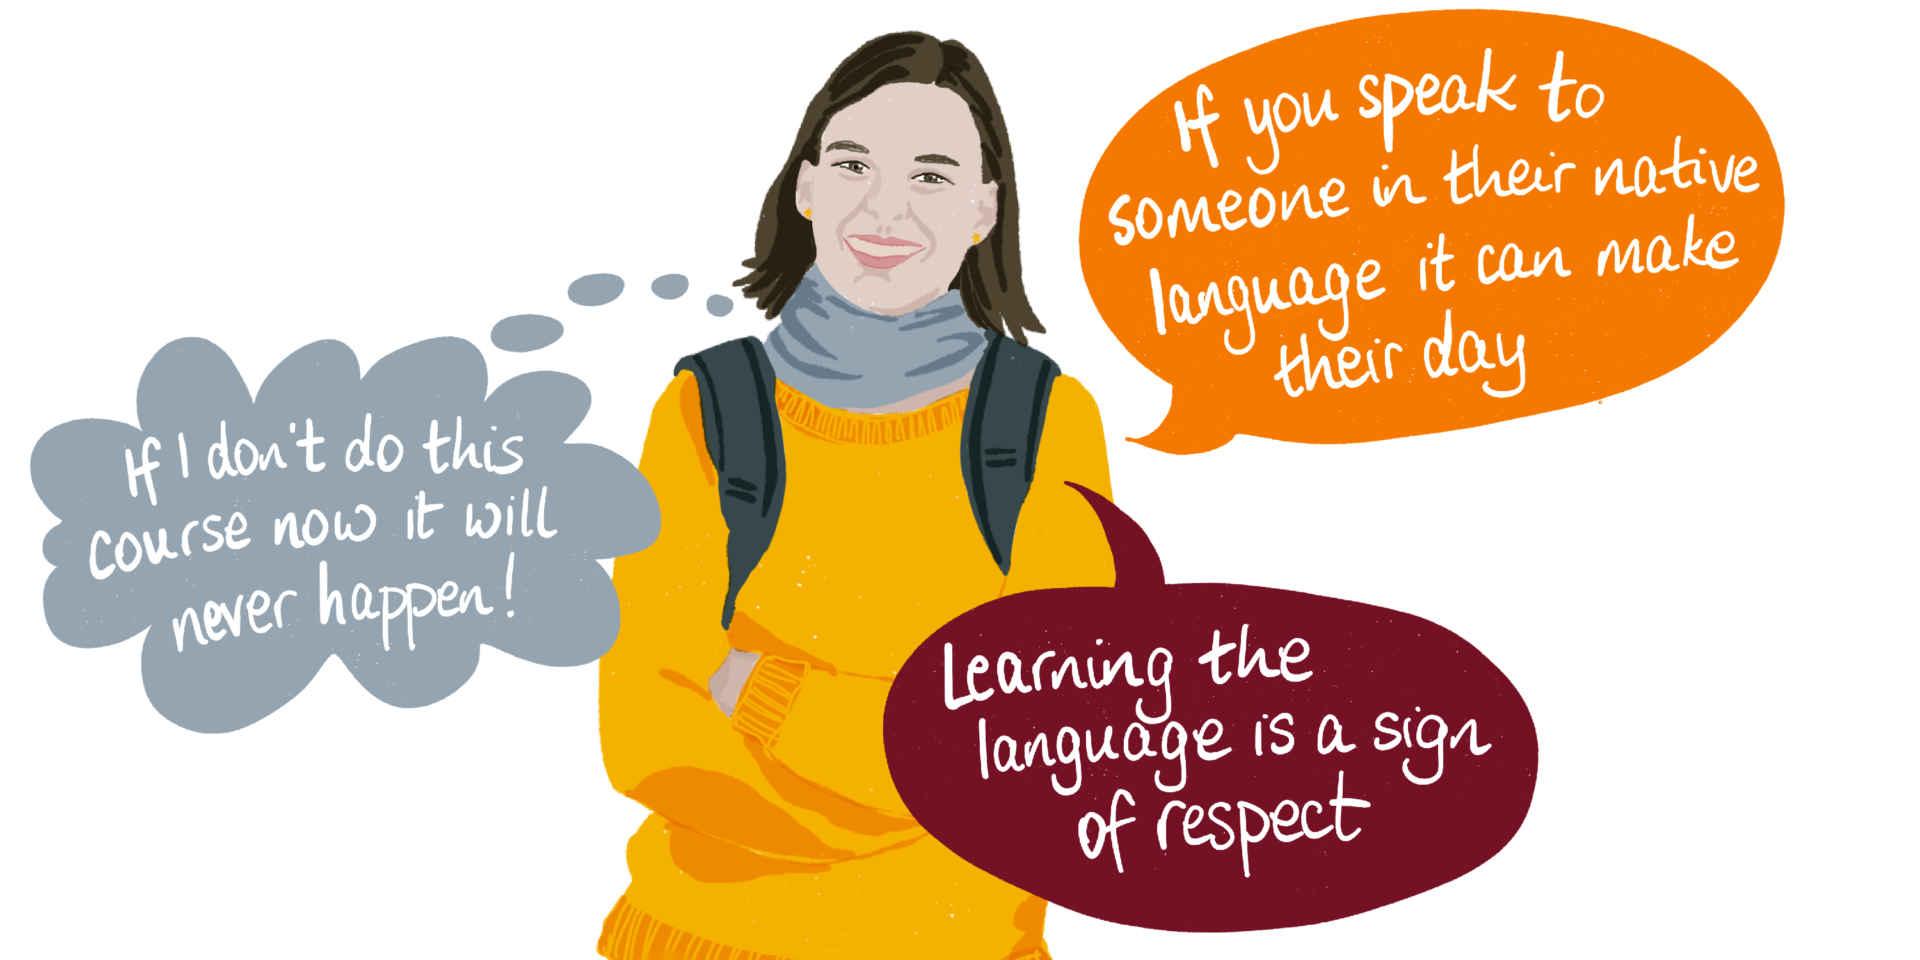 A digital illustration of Marina, a smiling young woman in a yellow jumper, with speech bubbles featuring quotes from the article